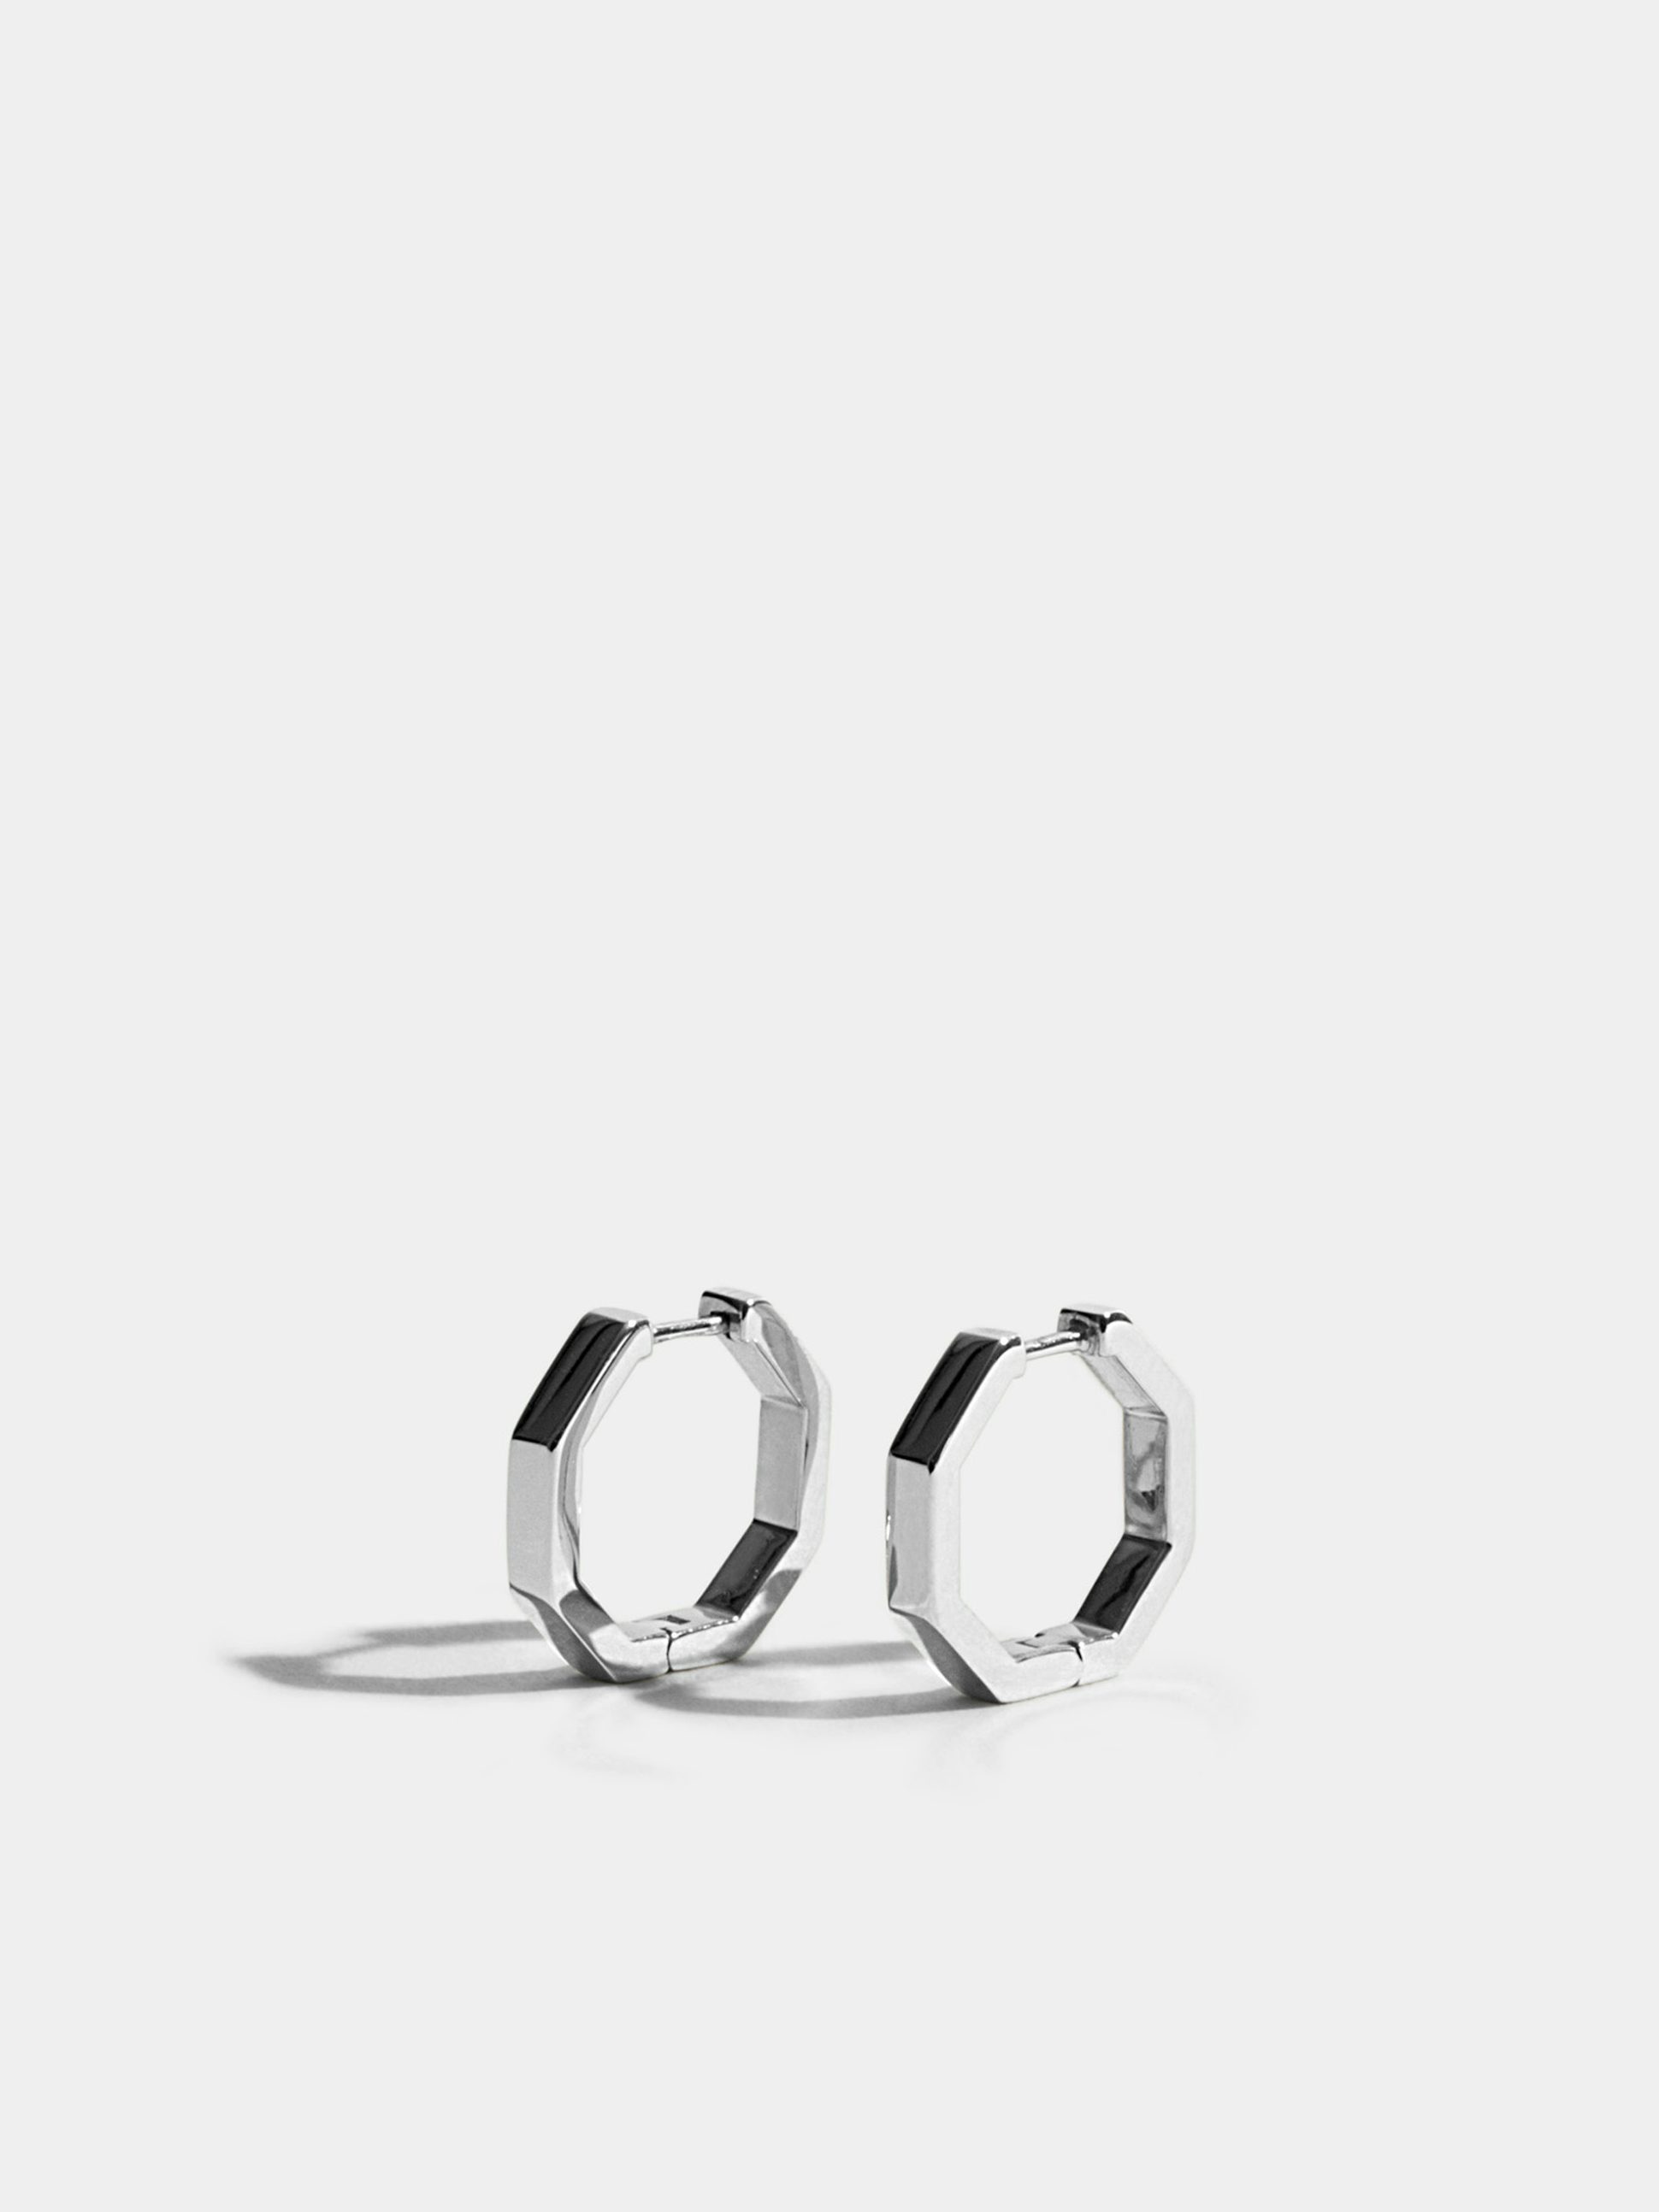 Octogone 13mm earrings in 18k Fairmined ethical white gold, the pair.